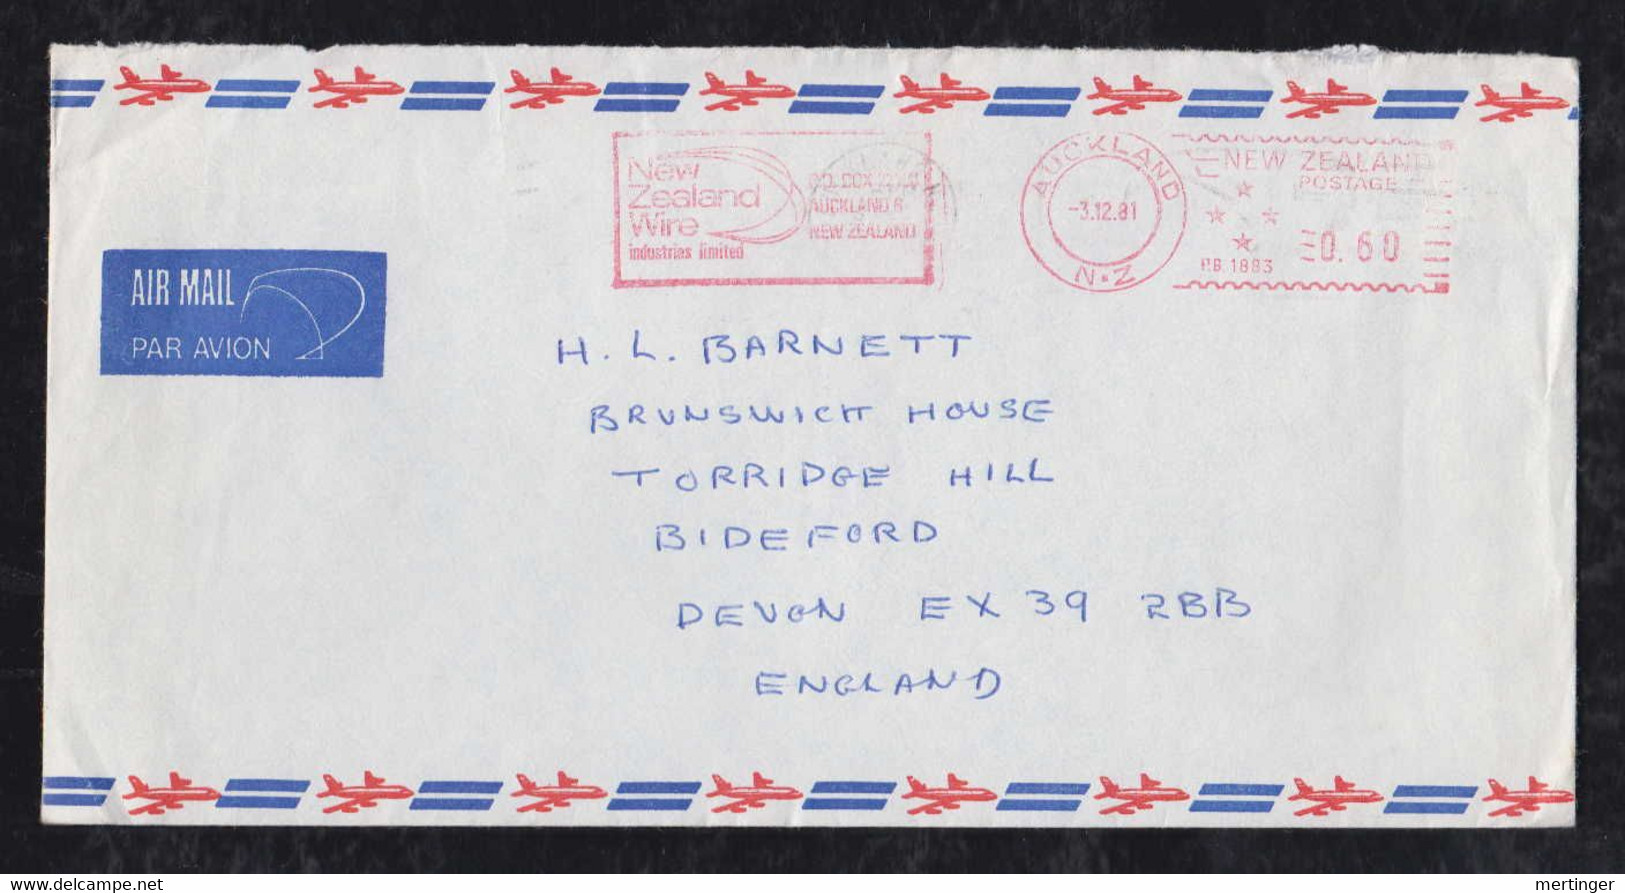 New Zealand 1981 Meter Airmail Cover $0,60 Auckland To Bideford England New Zealand Wire Advertising - Briefe U. Dokumente